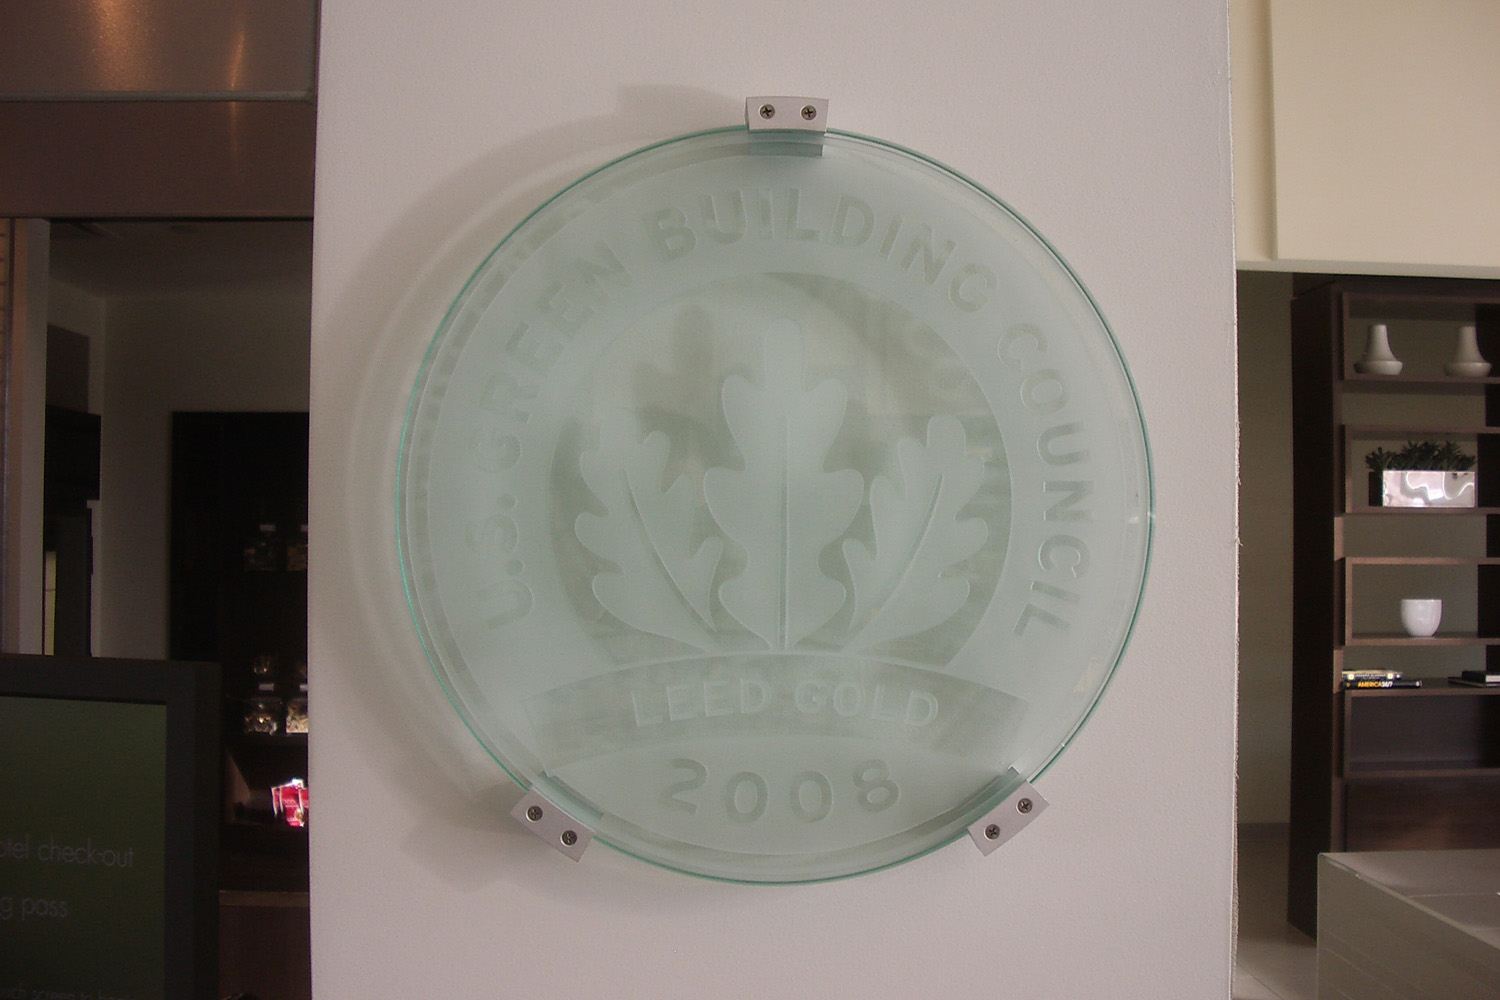 LEED certification plaque for Starwood's Element project 